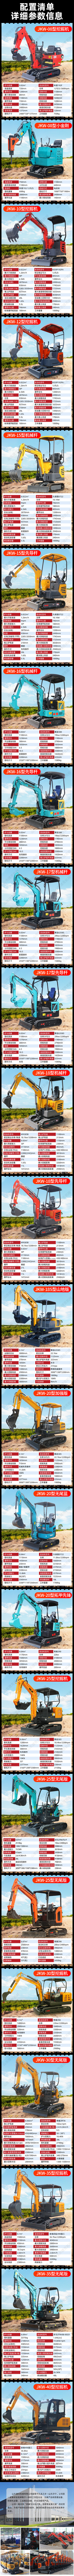 08 Small excavator, household excavator, micro agricultural machinery, hook machine, small machine, long arm small excavator